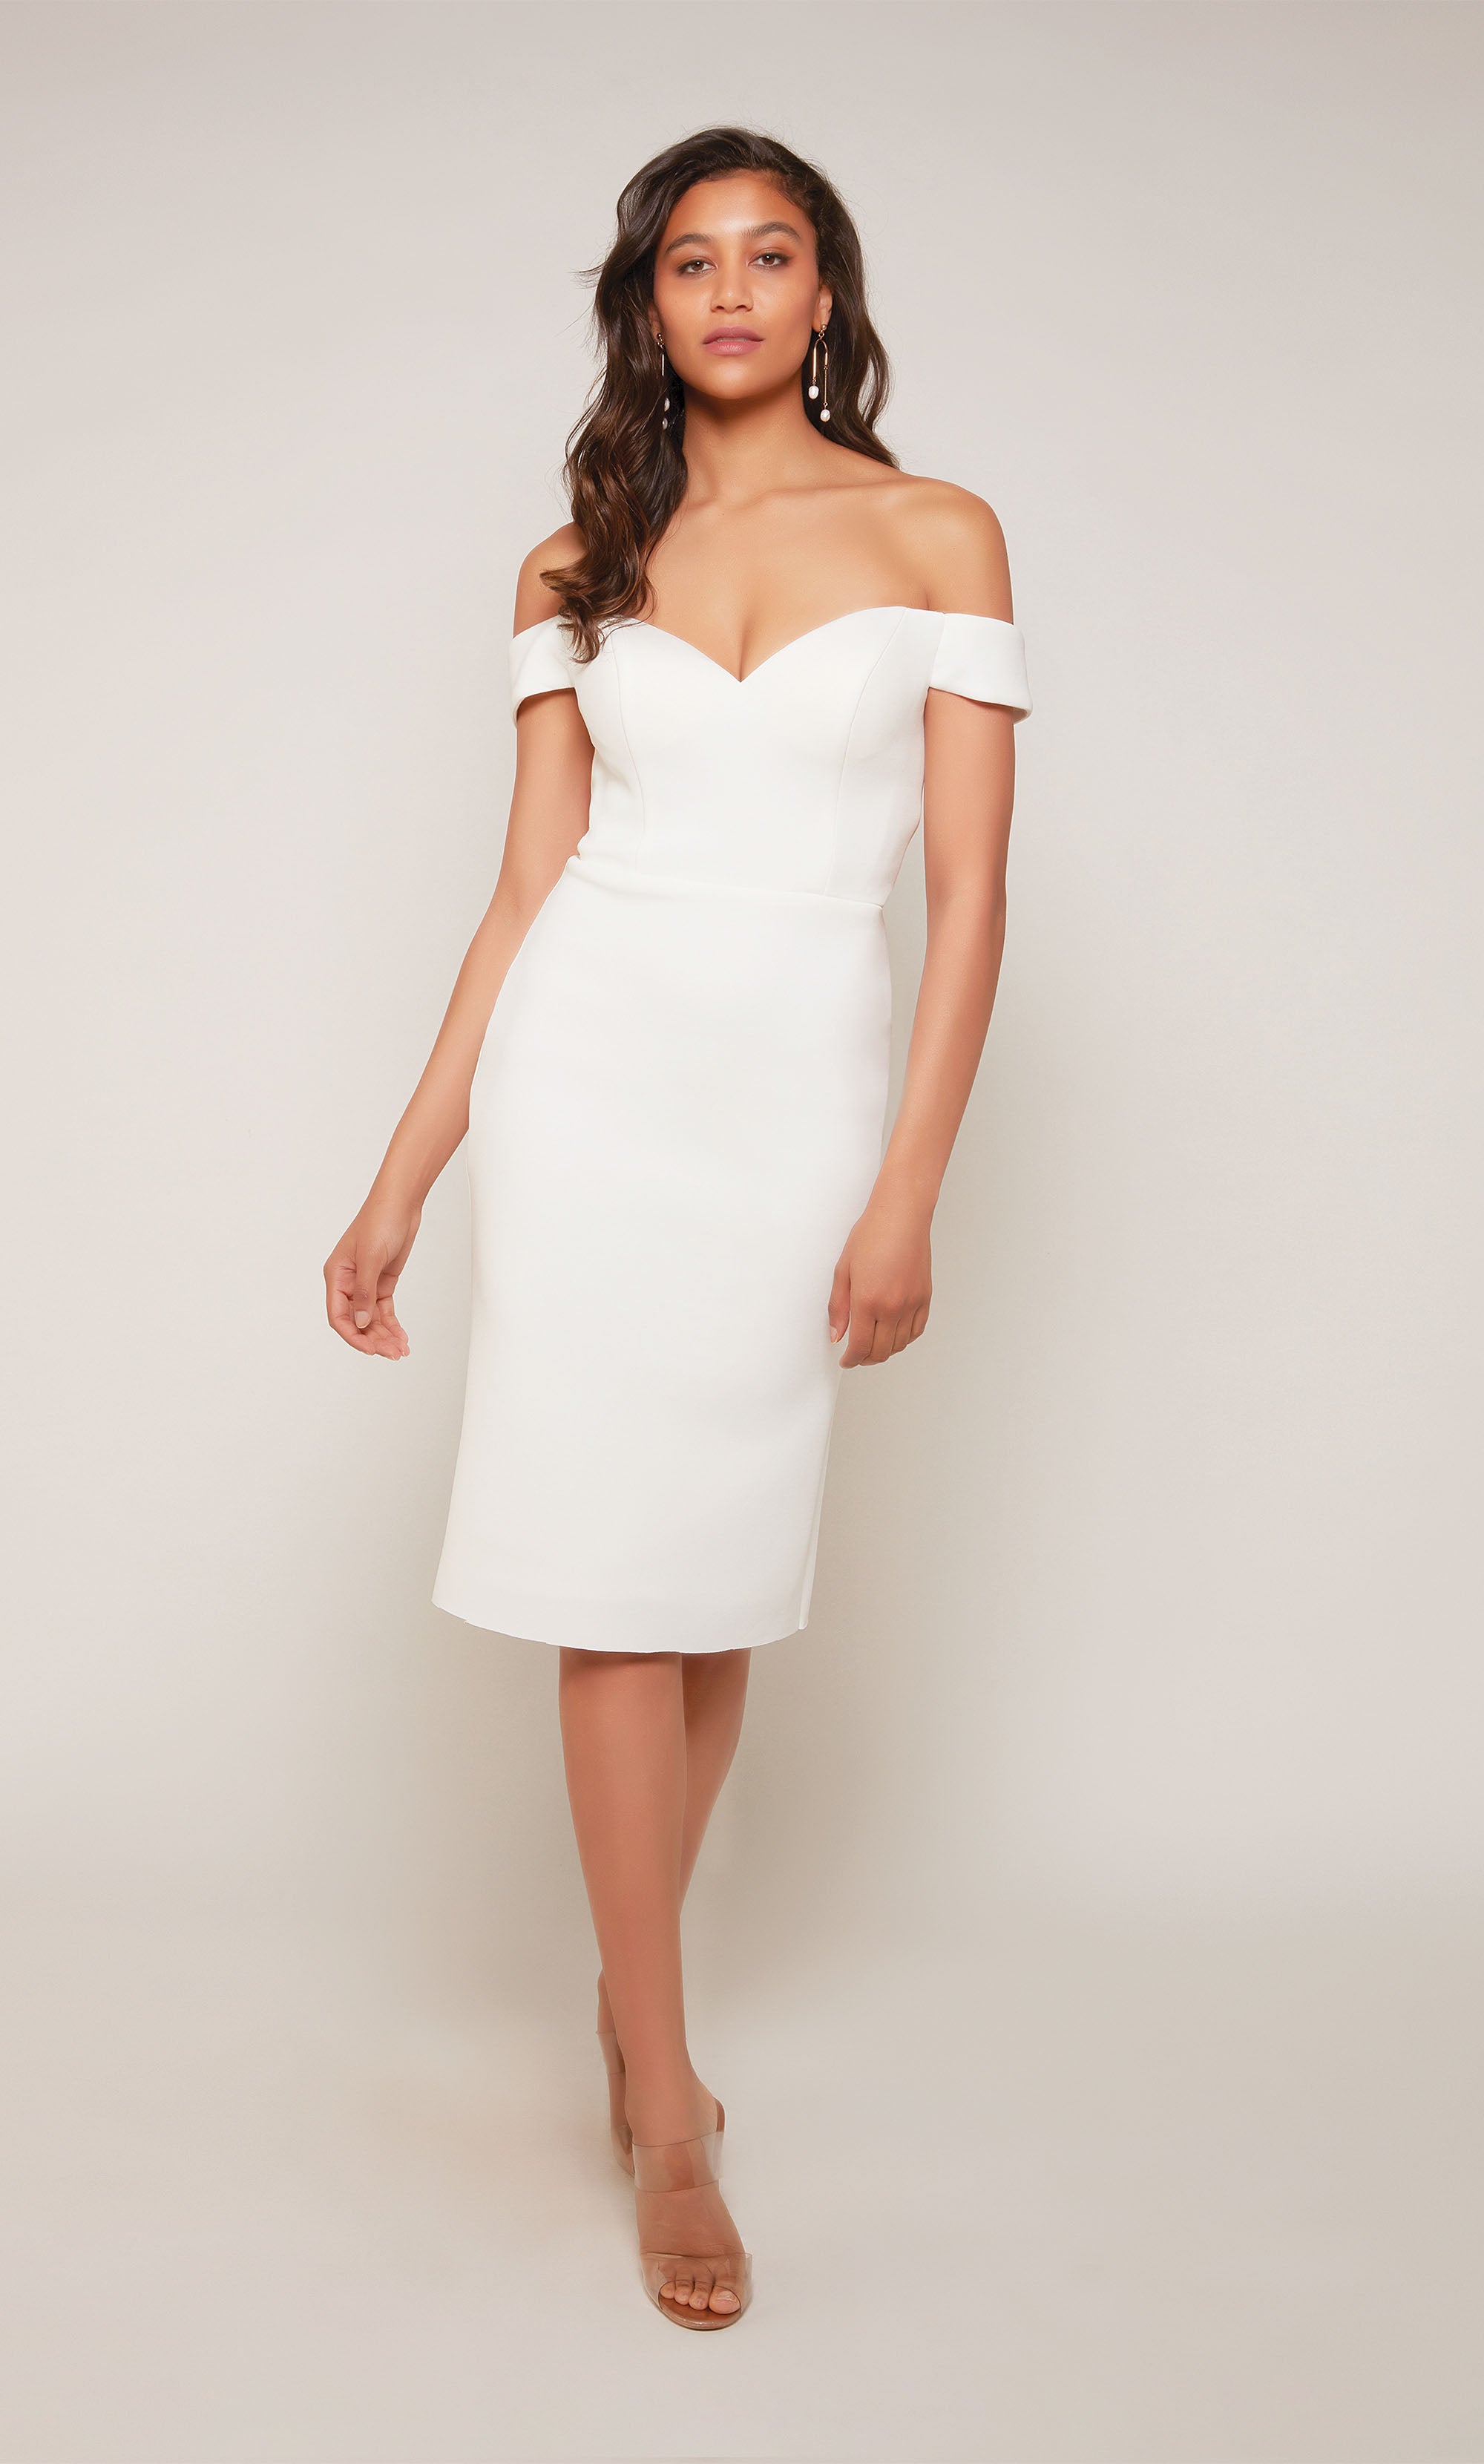 A simple, short wedding dress with an off the shoulder sweetheart neckline and a zipper back closure in diamond white.